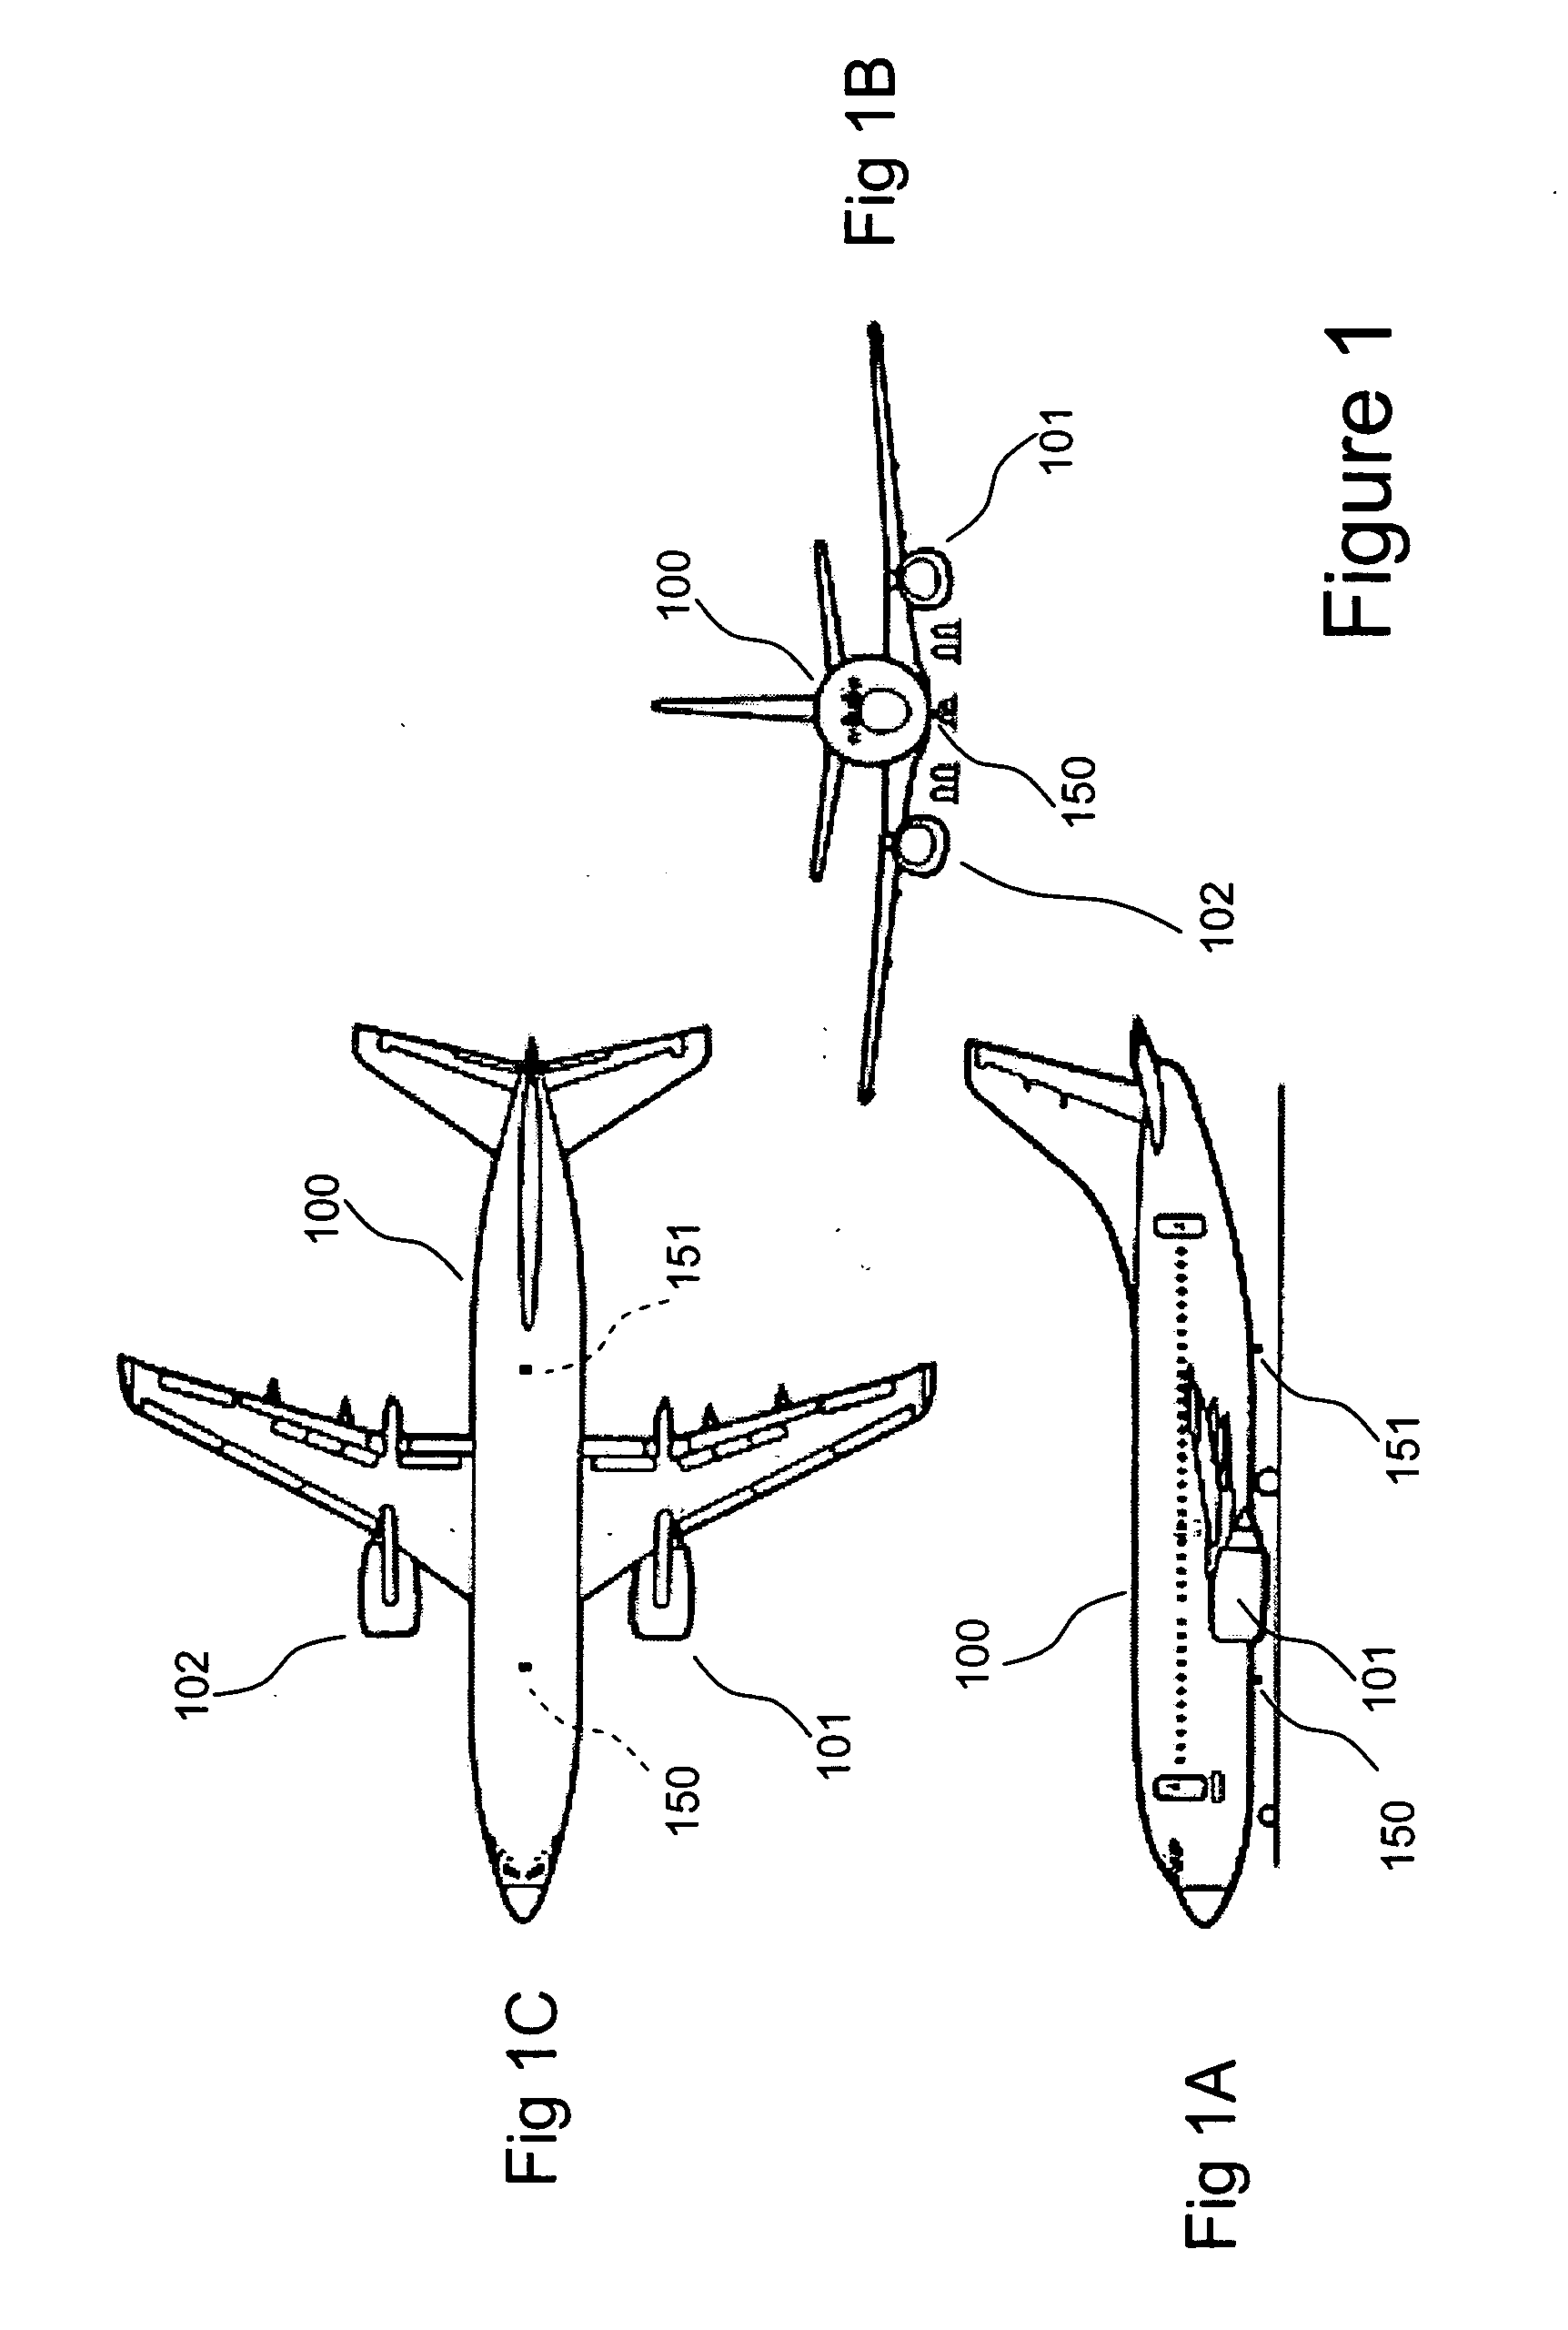 System for managing the multiple air-to-ground communications links originating from each aircraft in an air-to-ground cellular communication network